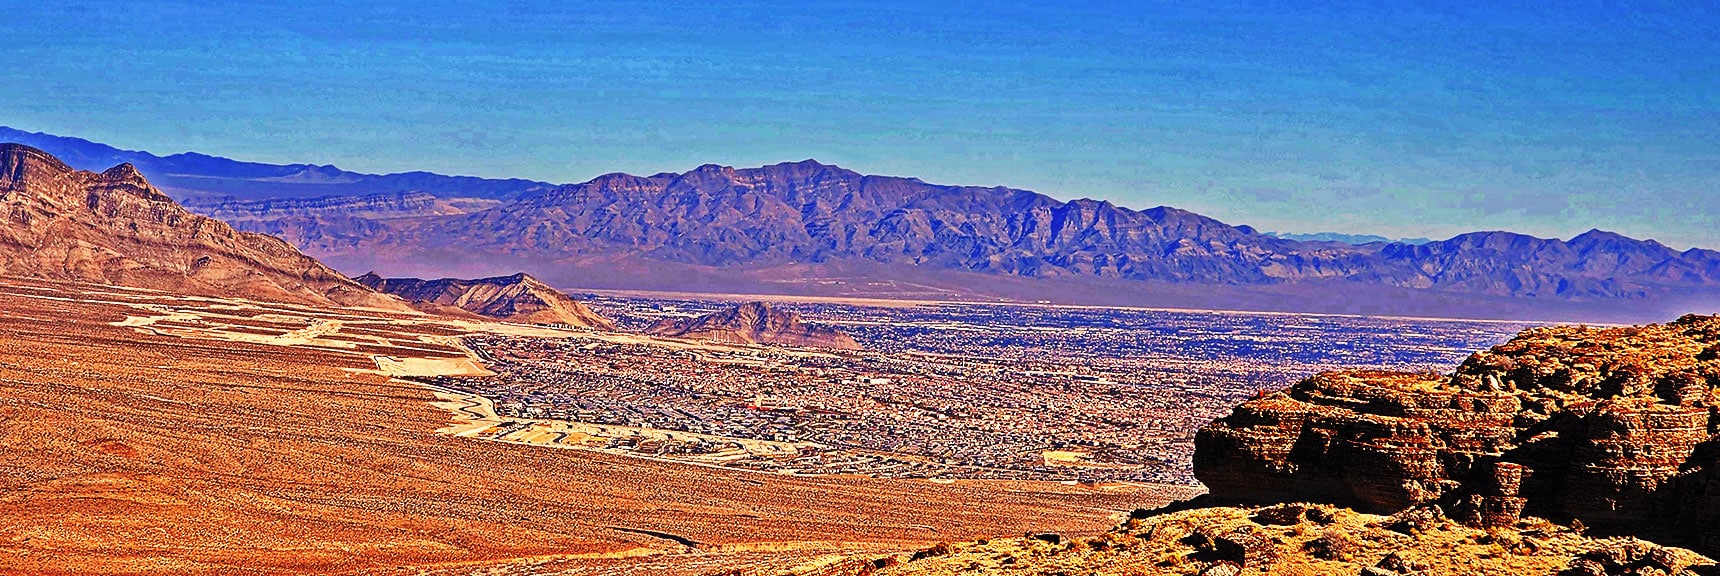 Summerlin, Cheyenne & Lone Mts., Gass Peak in Background. | Eastern Outer Circuit | Blue Diamond Hill | Red Rock Canyon, Nevada